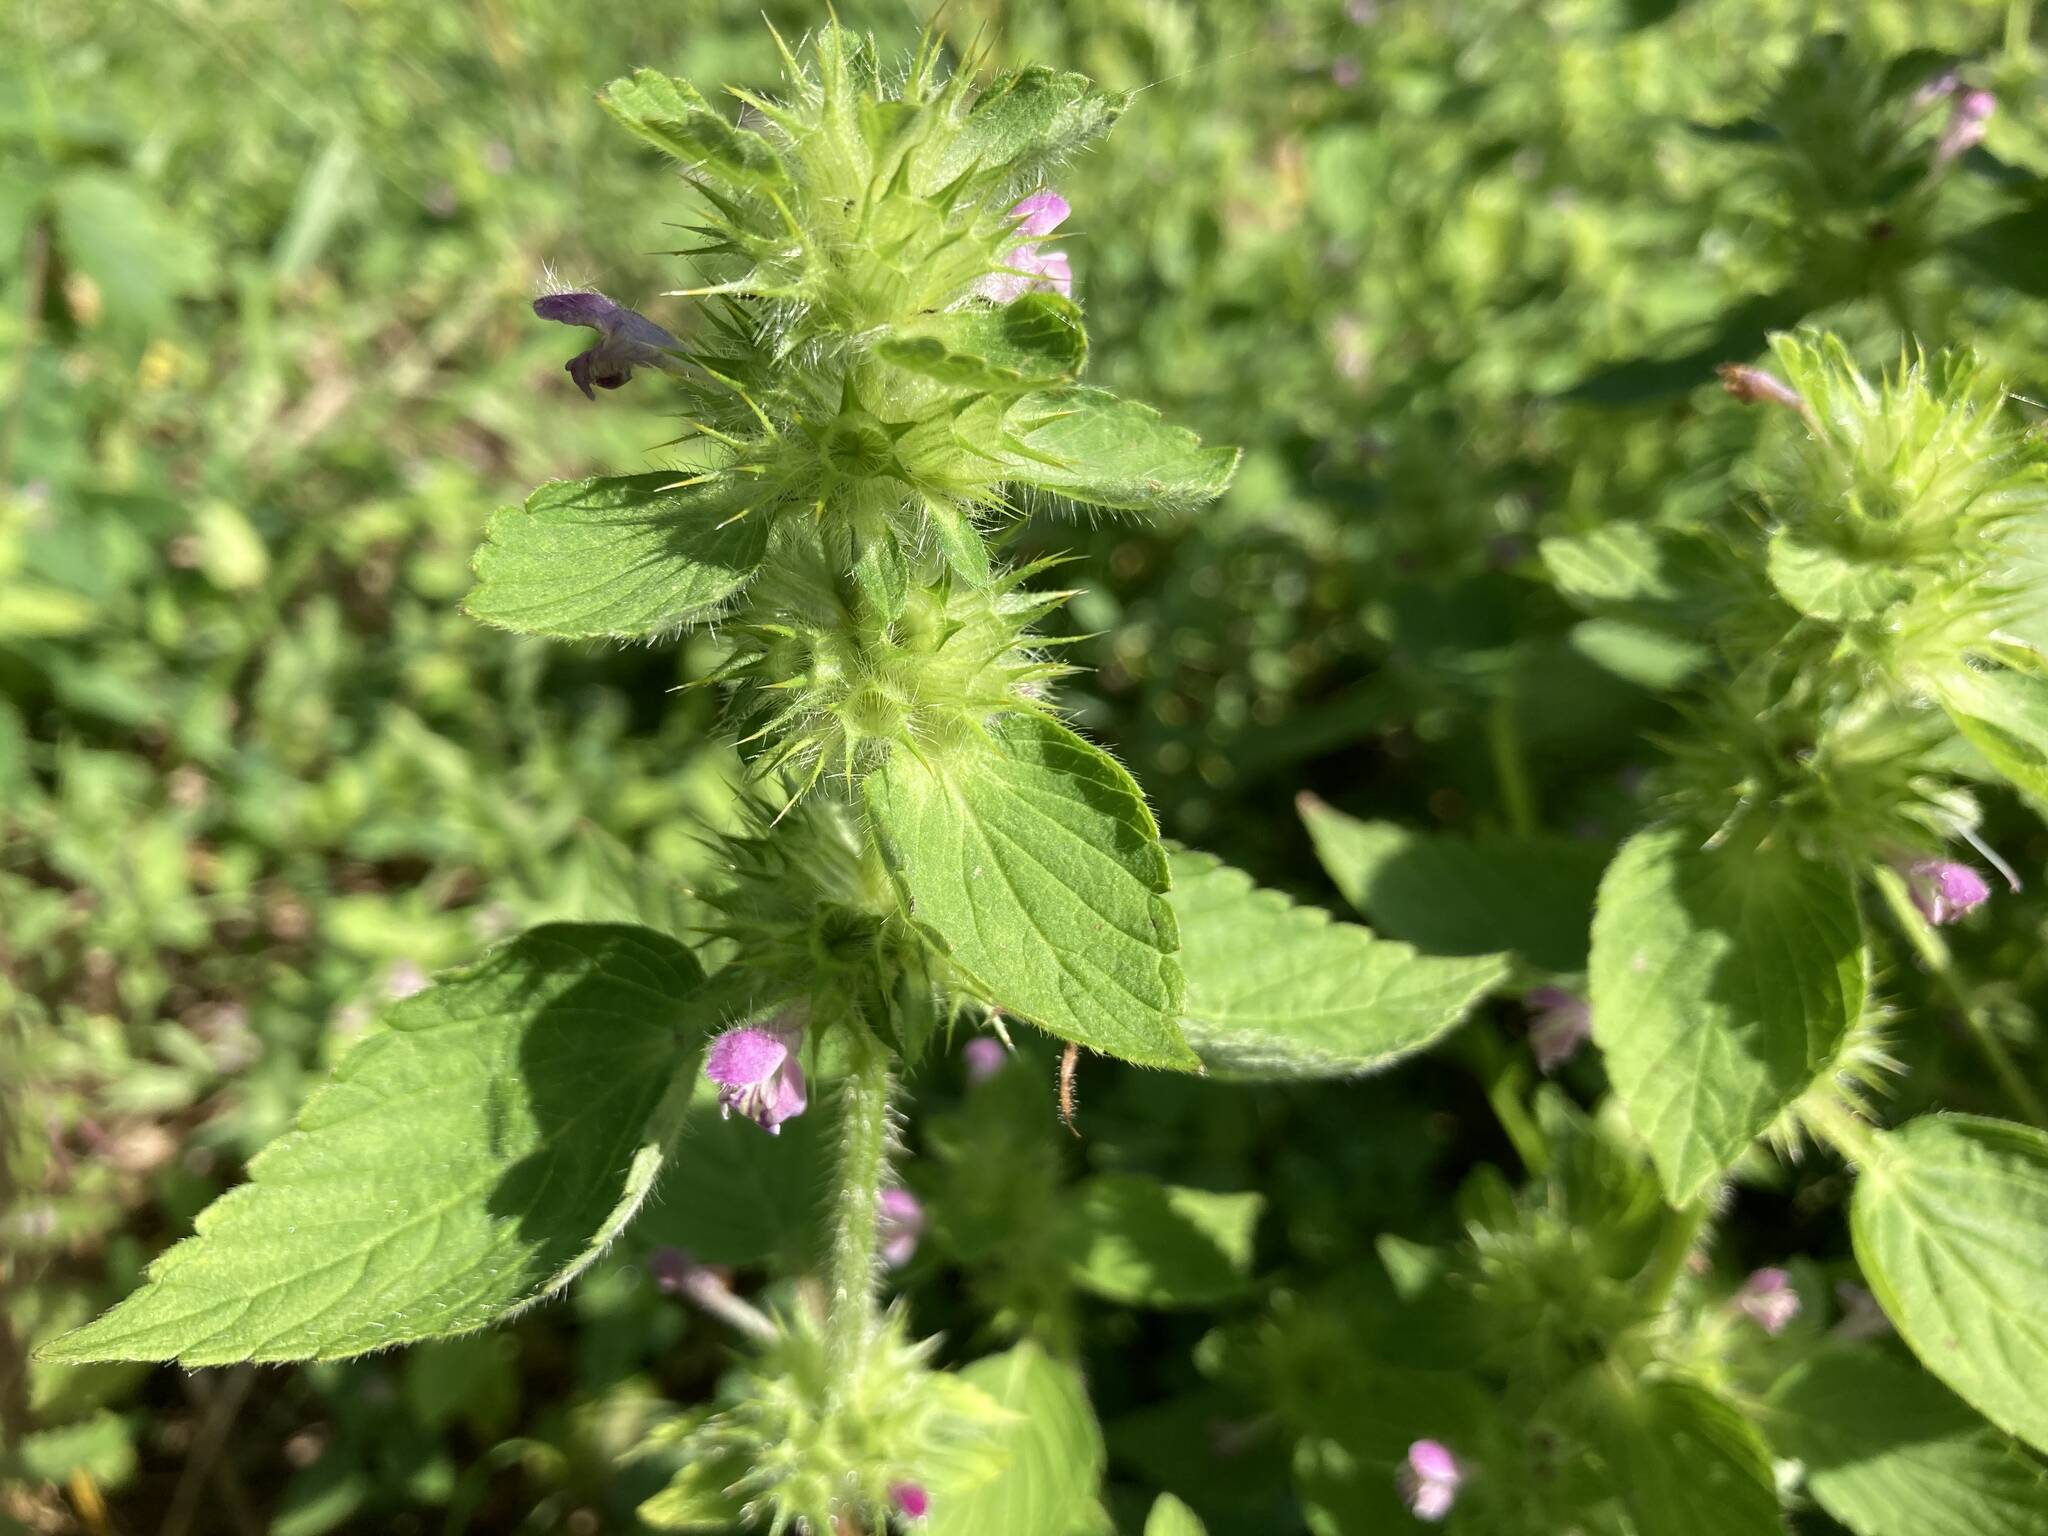 Hemp nettle shows its bristles and spines (Mary F. Willson/ For the Juneau Empire)